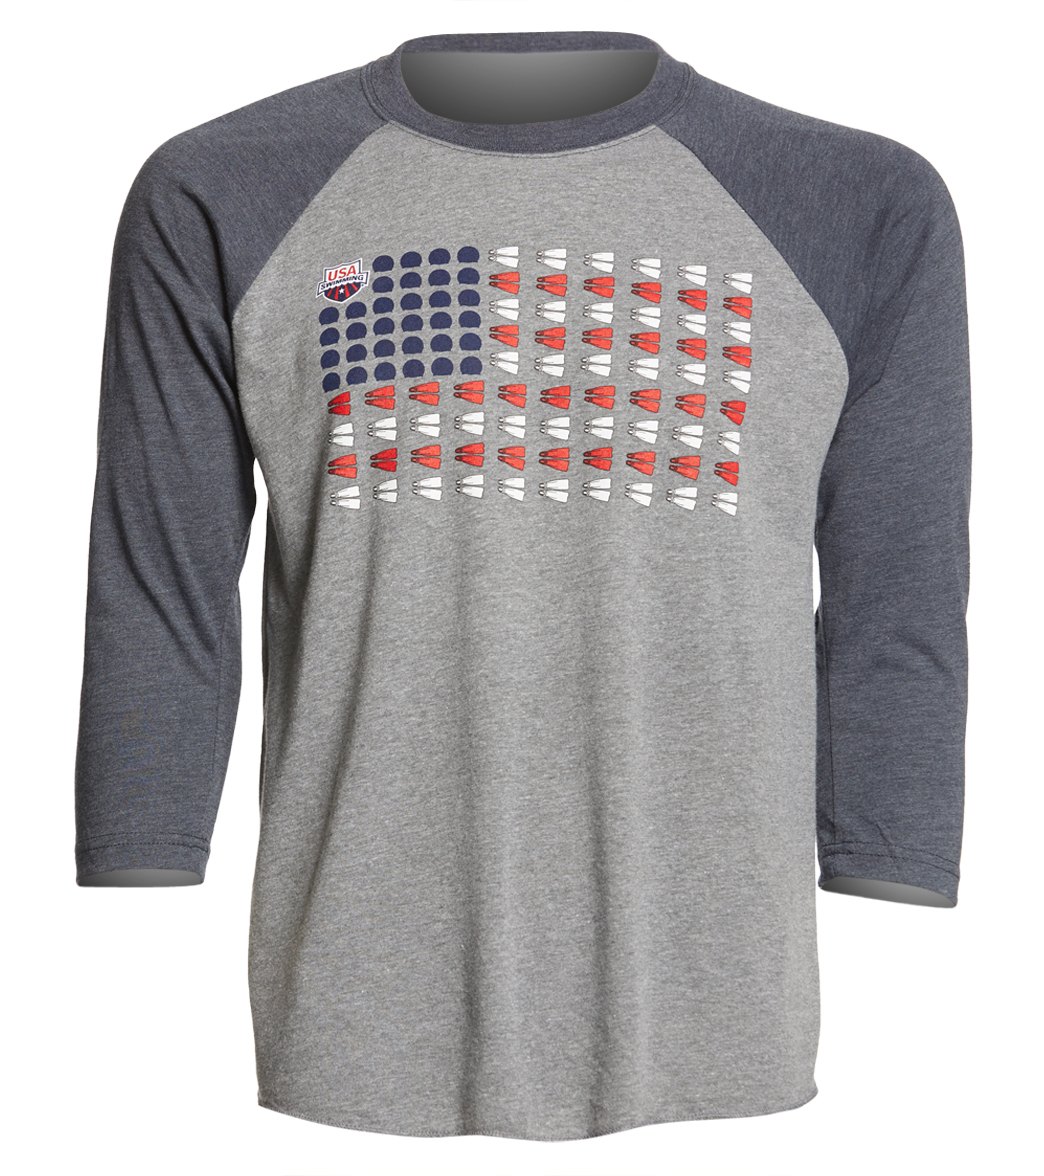 Usa Swimming Men's Caps And Fins Raglan T-Shirt - Vintage Navy/Heather Grey X-Small Cotton/Polyester/Rayon - Swimoutlet.com